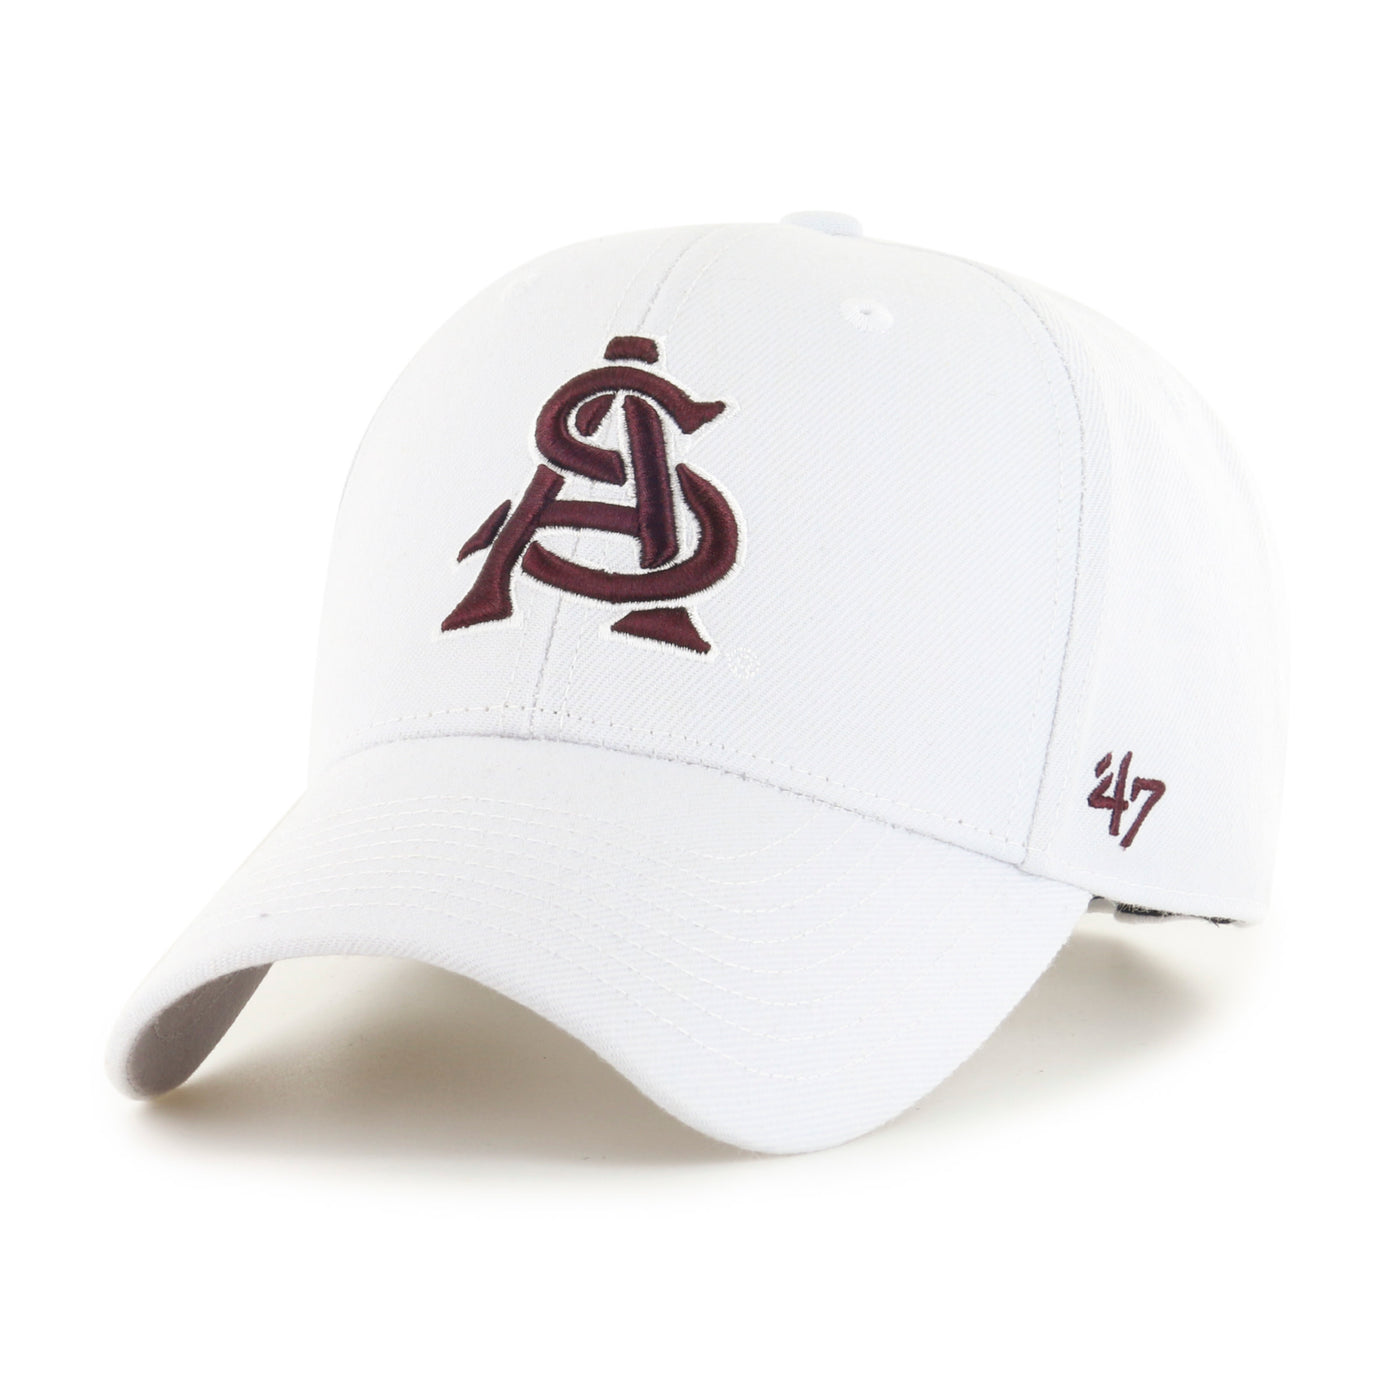 ASU white hat with maroon interlocking 'A' and 'S'